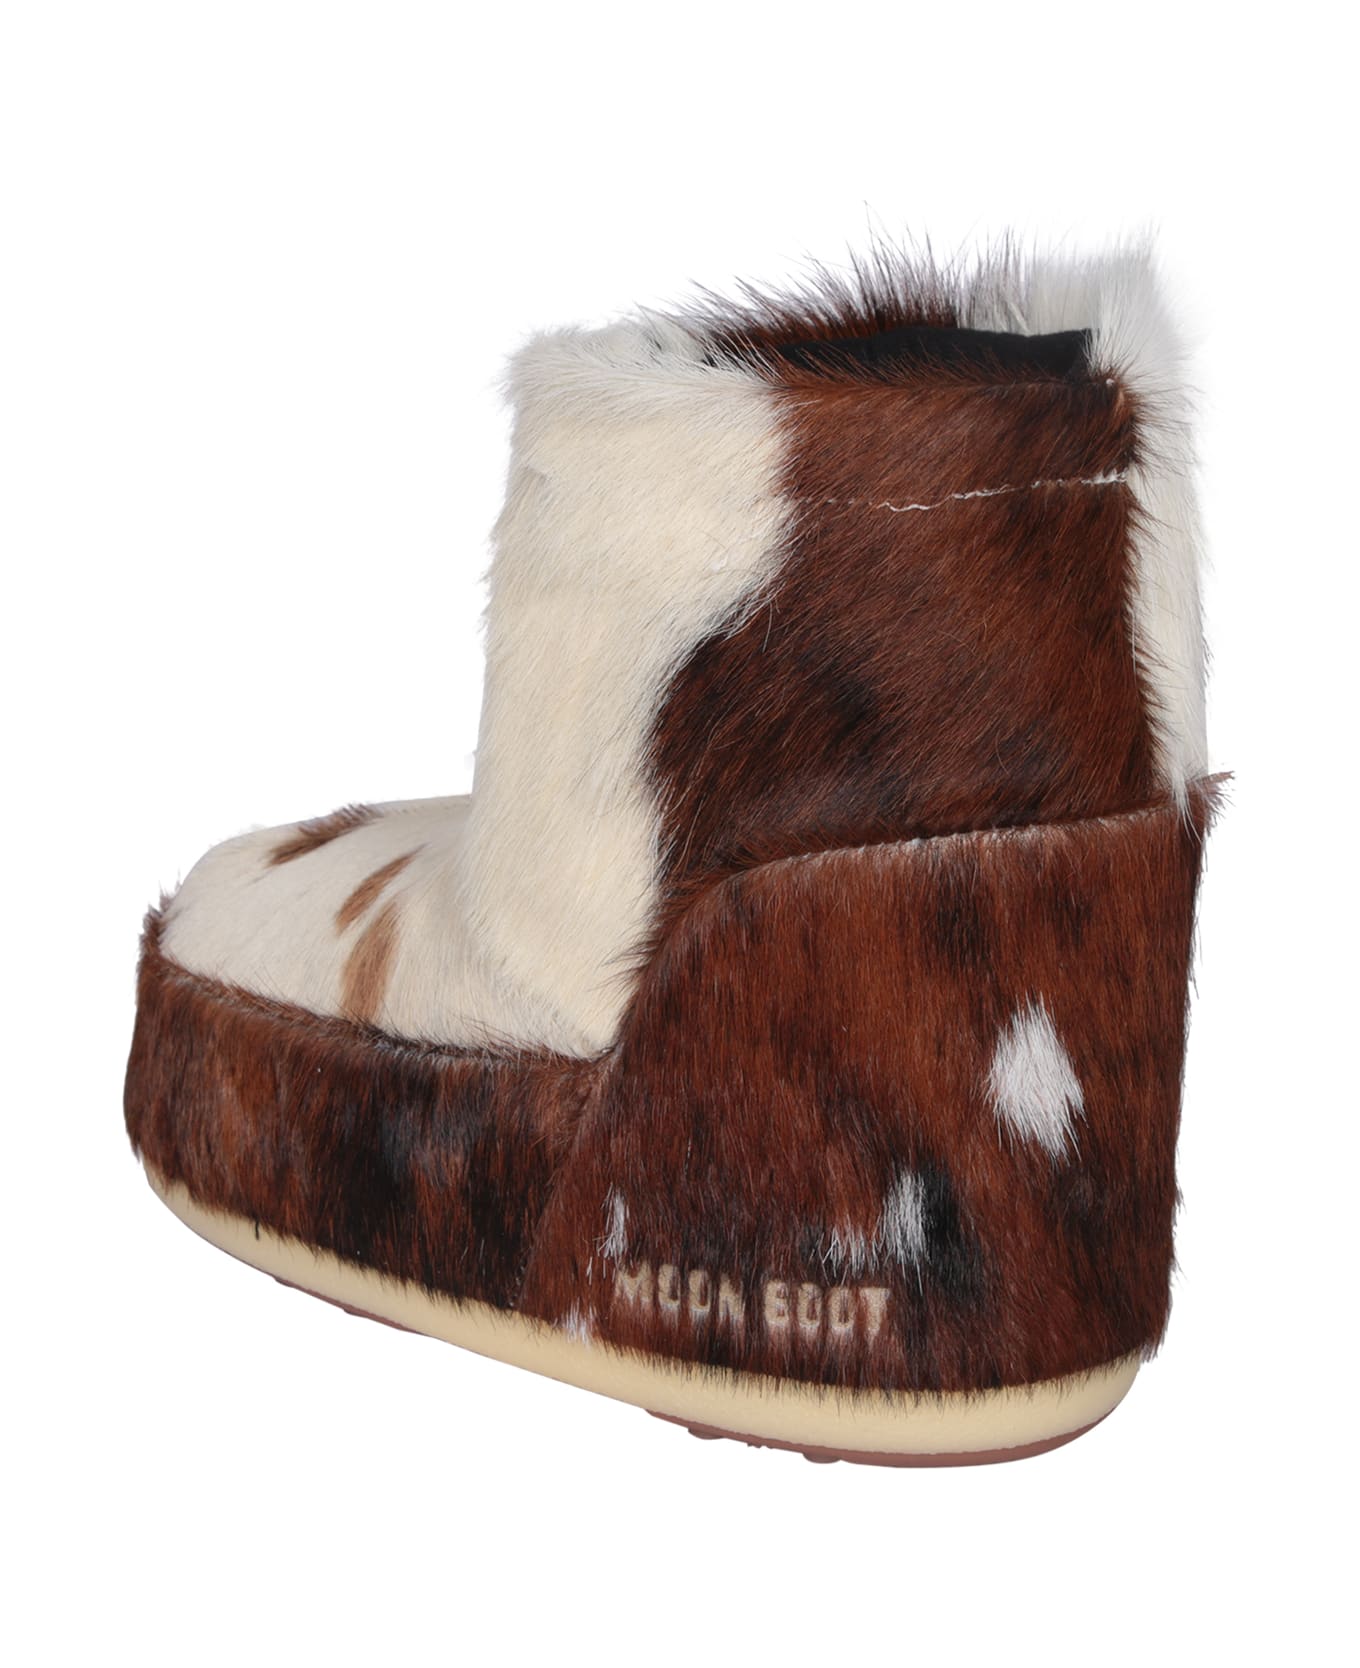 Moon Boot Icon Low No Lace Pony White/brown - White